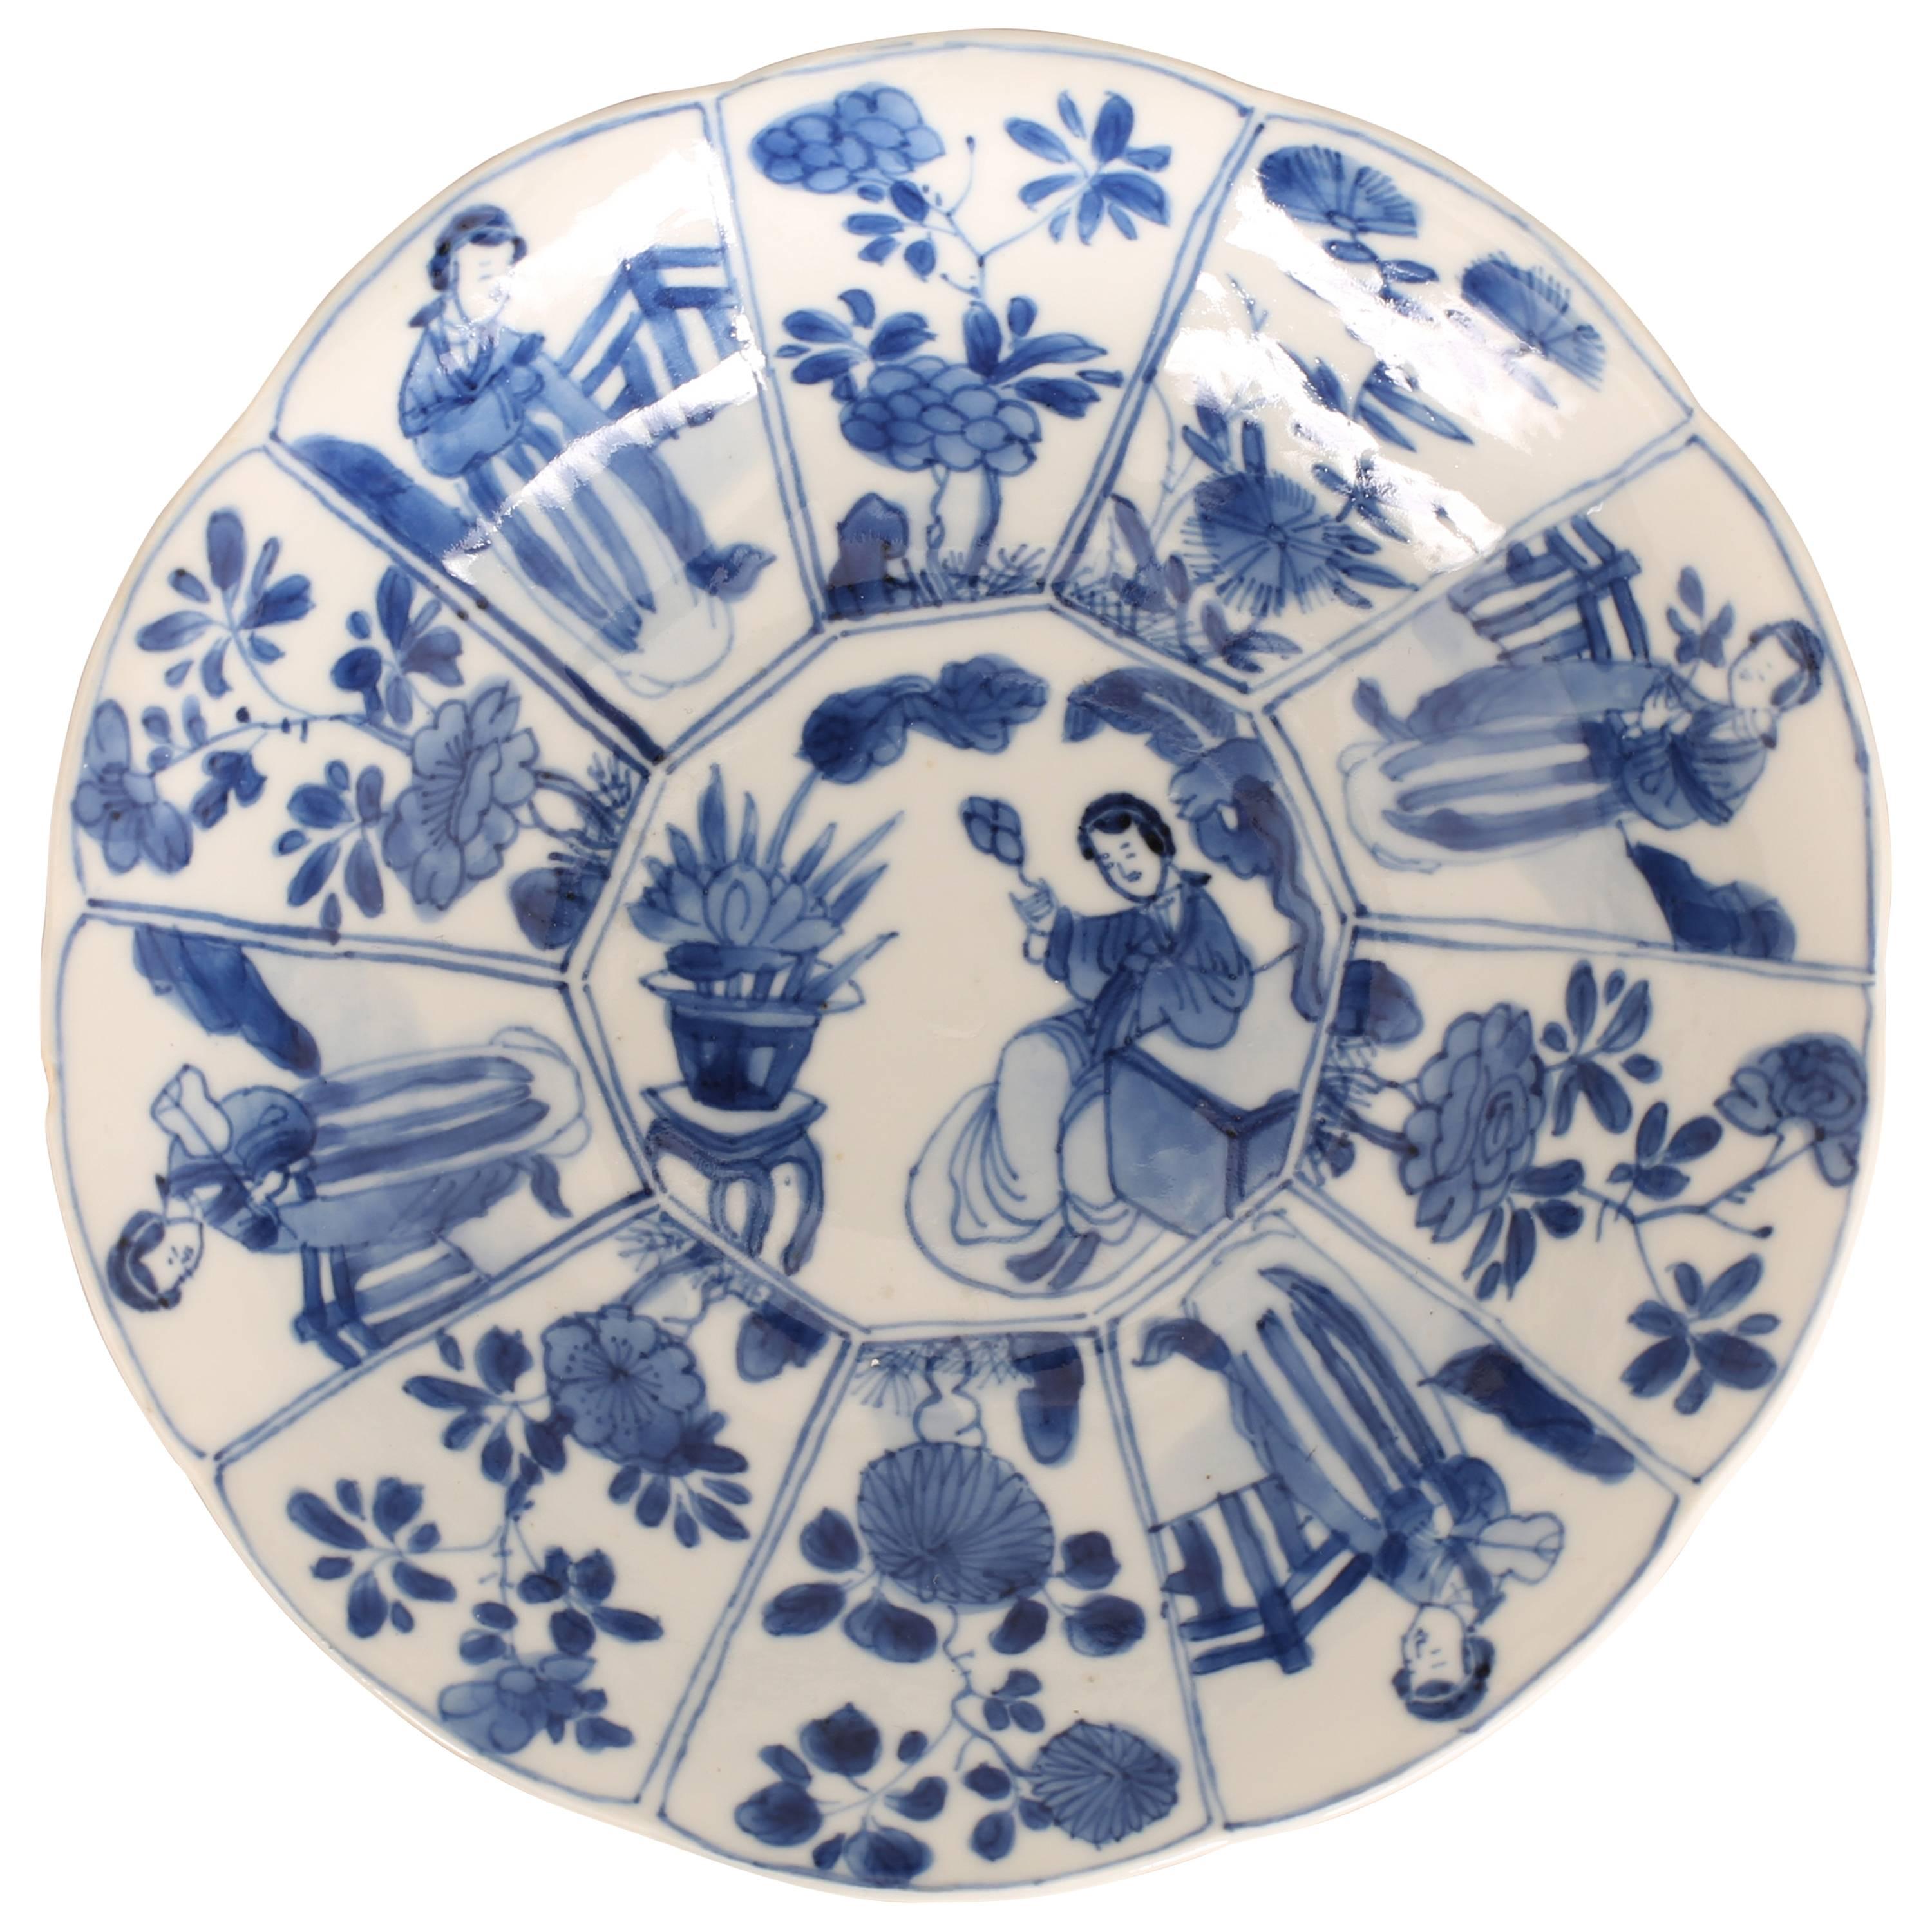  Chinese Porcelain Blue and White Saucer Dish, Women and Flowers, 19th Century For Sale